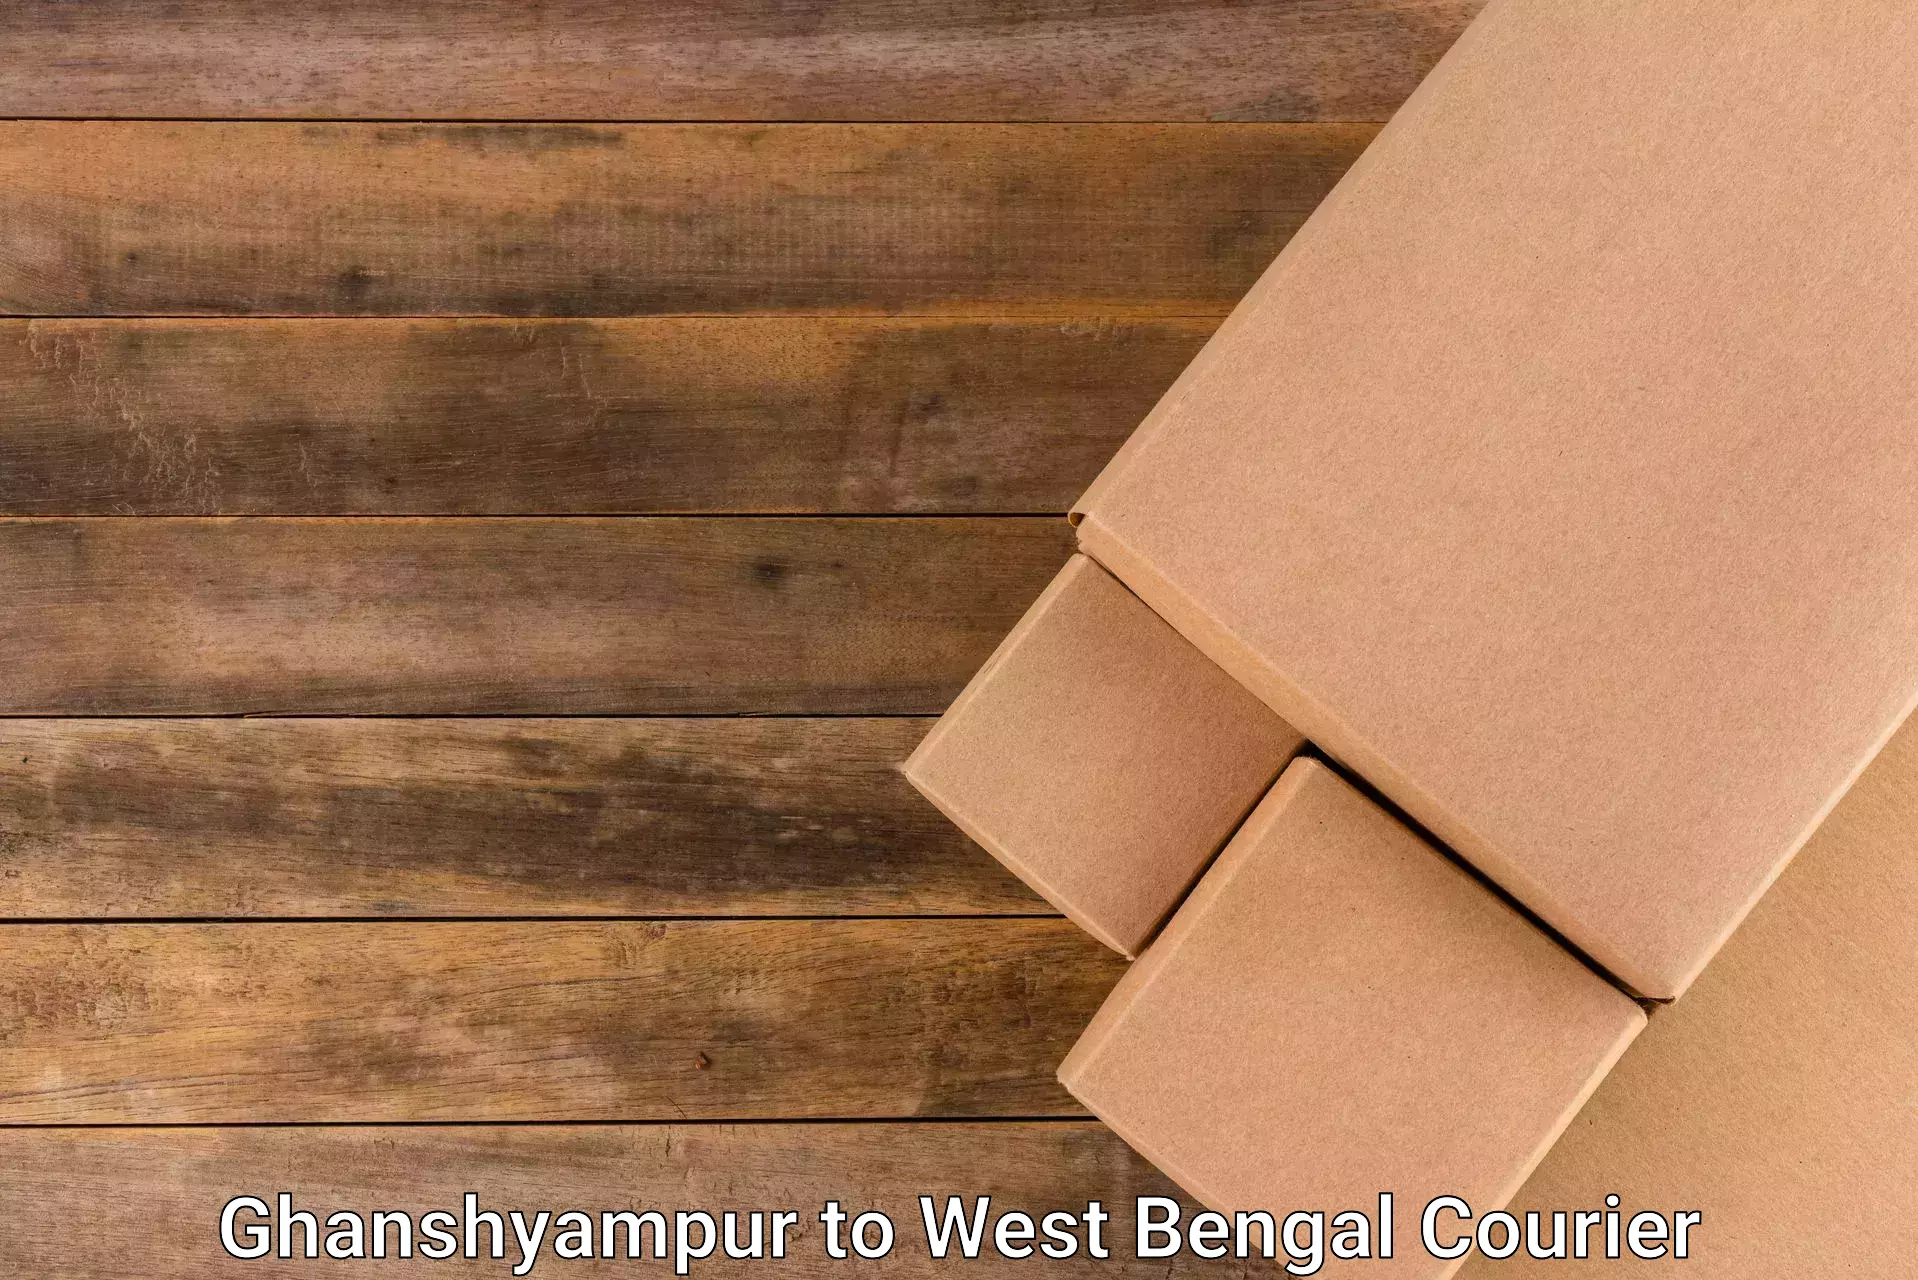 Courier service booking in Ghanshyampur to Kanchrapara